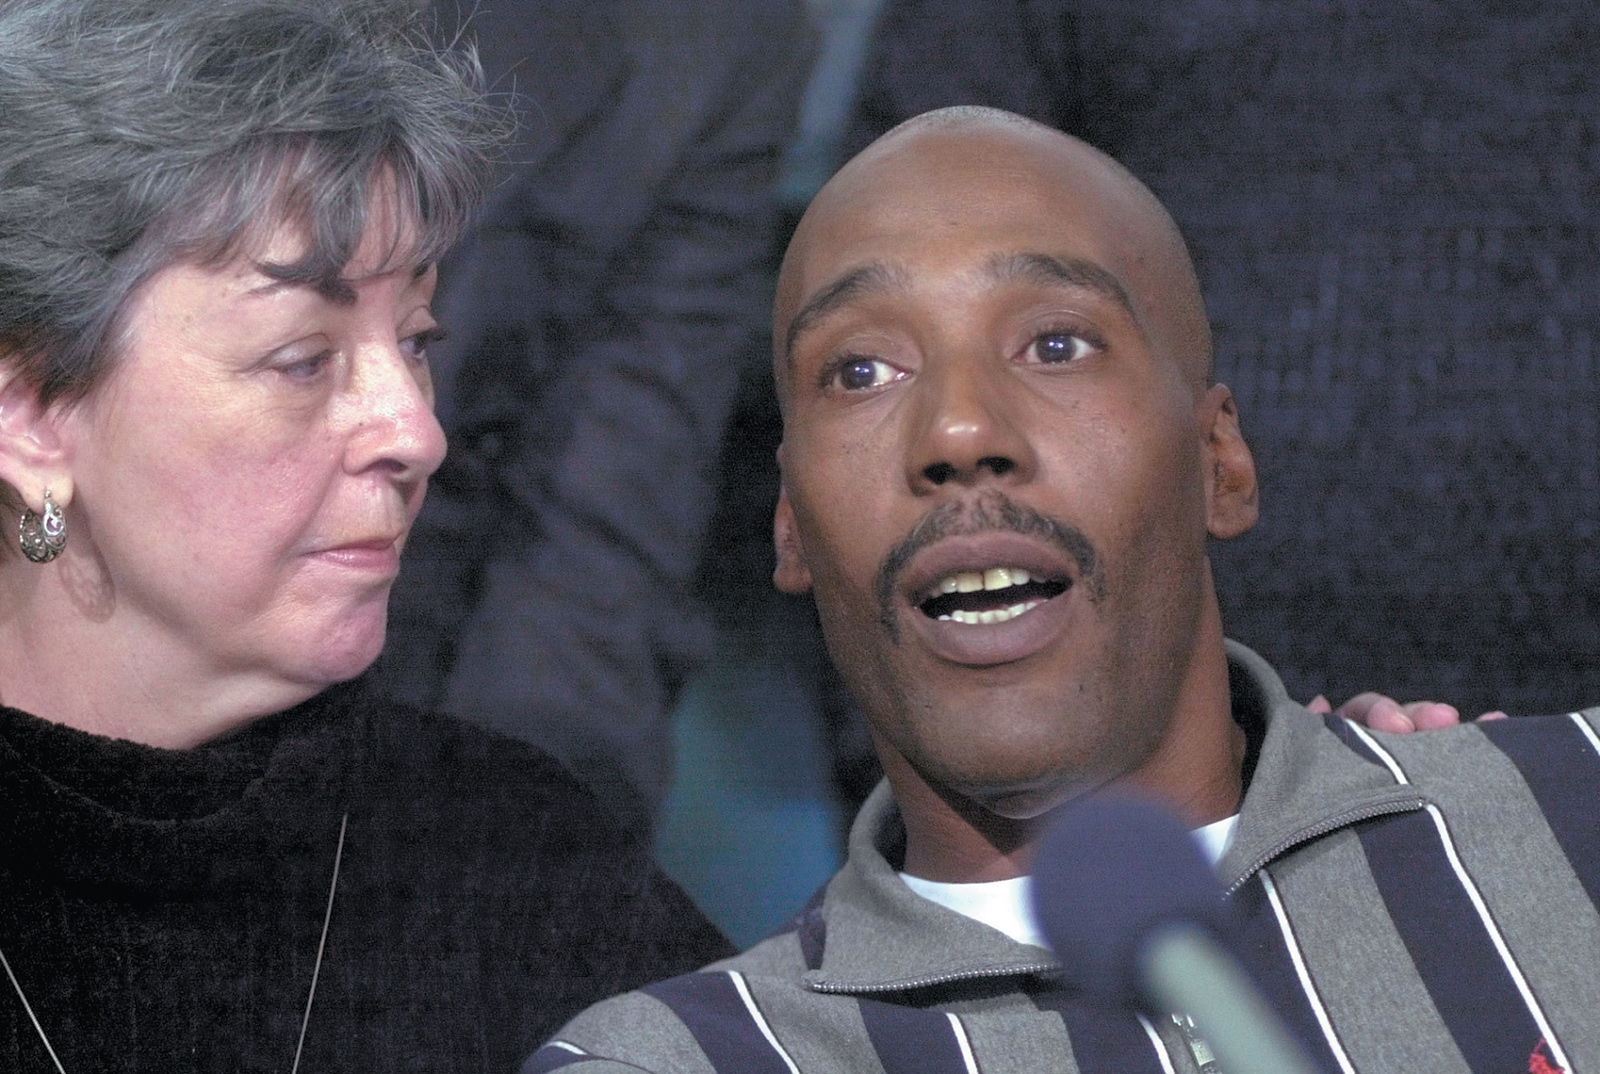 Earl Washington, who in 1984 was wrongfully convicted of rape and murder, with Marie Deans, a member of his legal team, at a press conference in Virginia Beach after he was freed from prison, February 2001. Washington spent more than seventeen years in prison—many of them on death row—and once came within nine days of execution. He was exonerated after DNA testing proved his innocence.